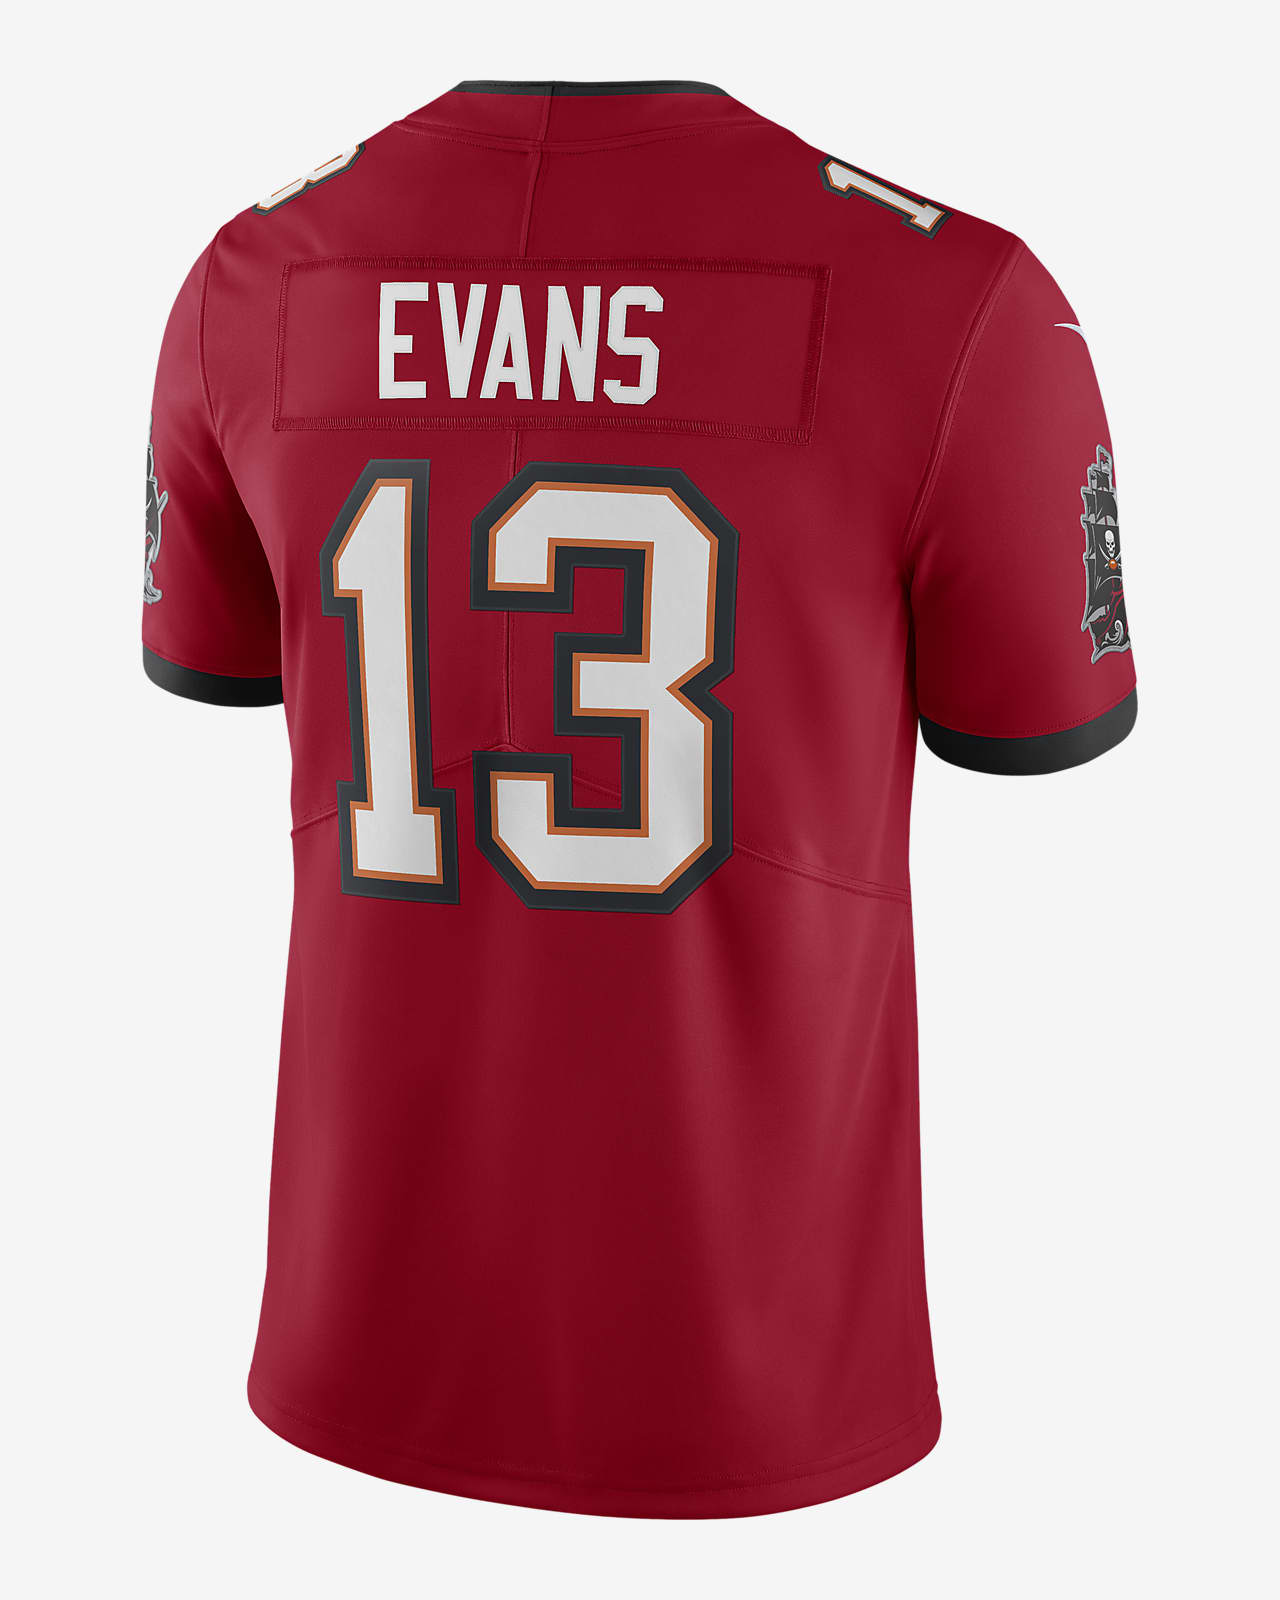 mike evans jersey